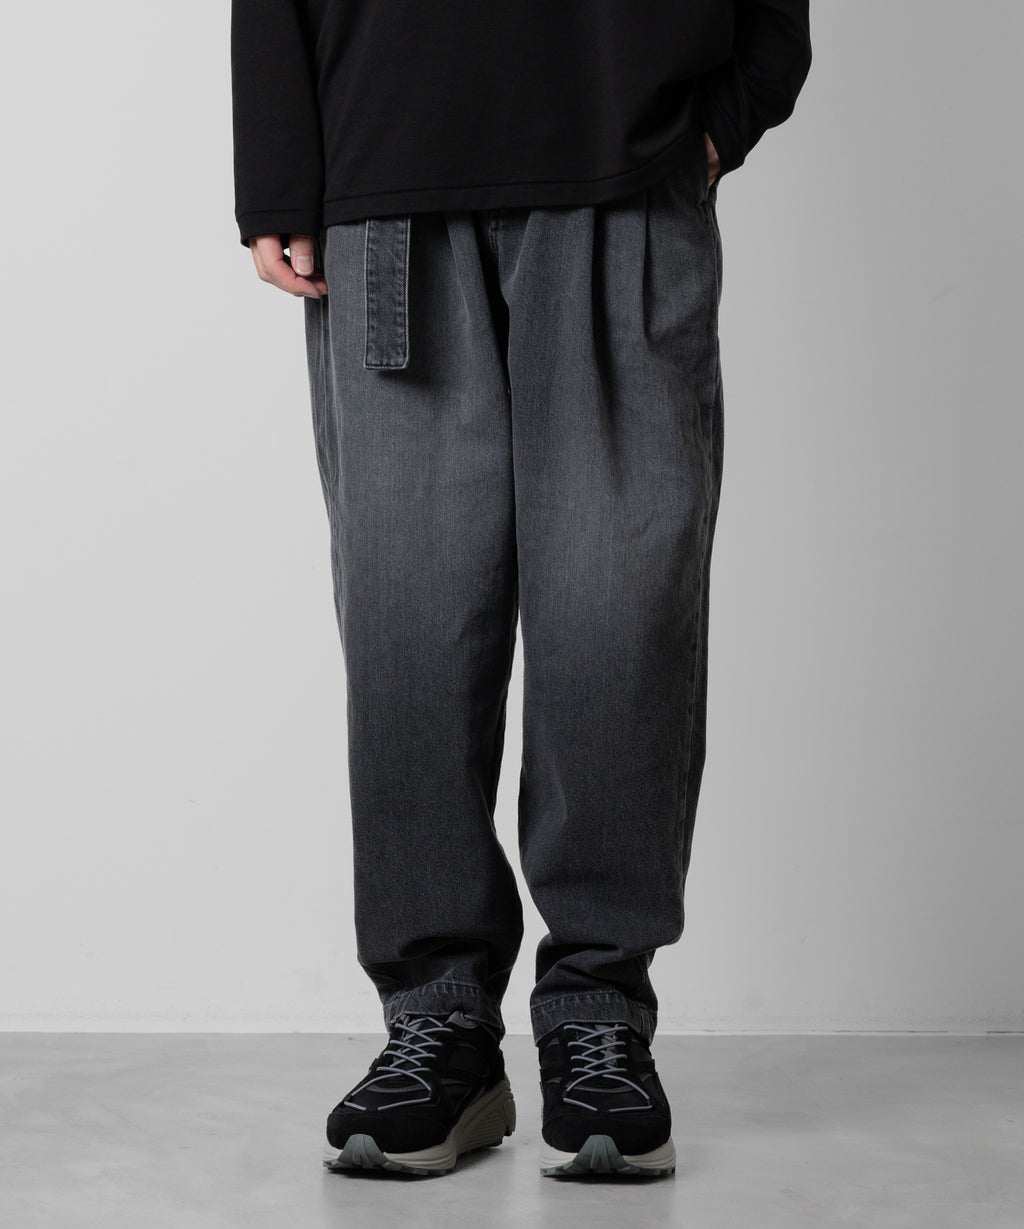 【ATTACHMENT】ATTACHMENT アタッチメントの11oz DENIM BELTED TAPERED FIT TROUSERS - BLACK 公式通販サイトsession福岡セレクトショップ